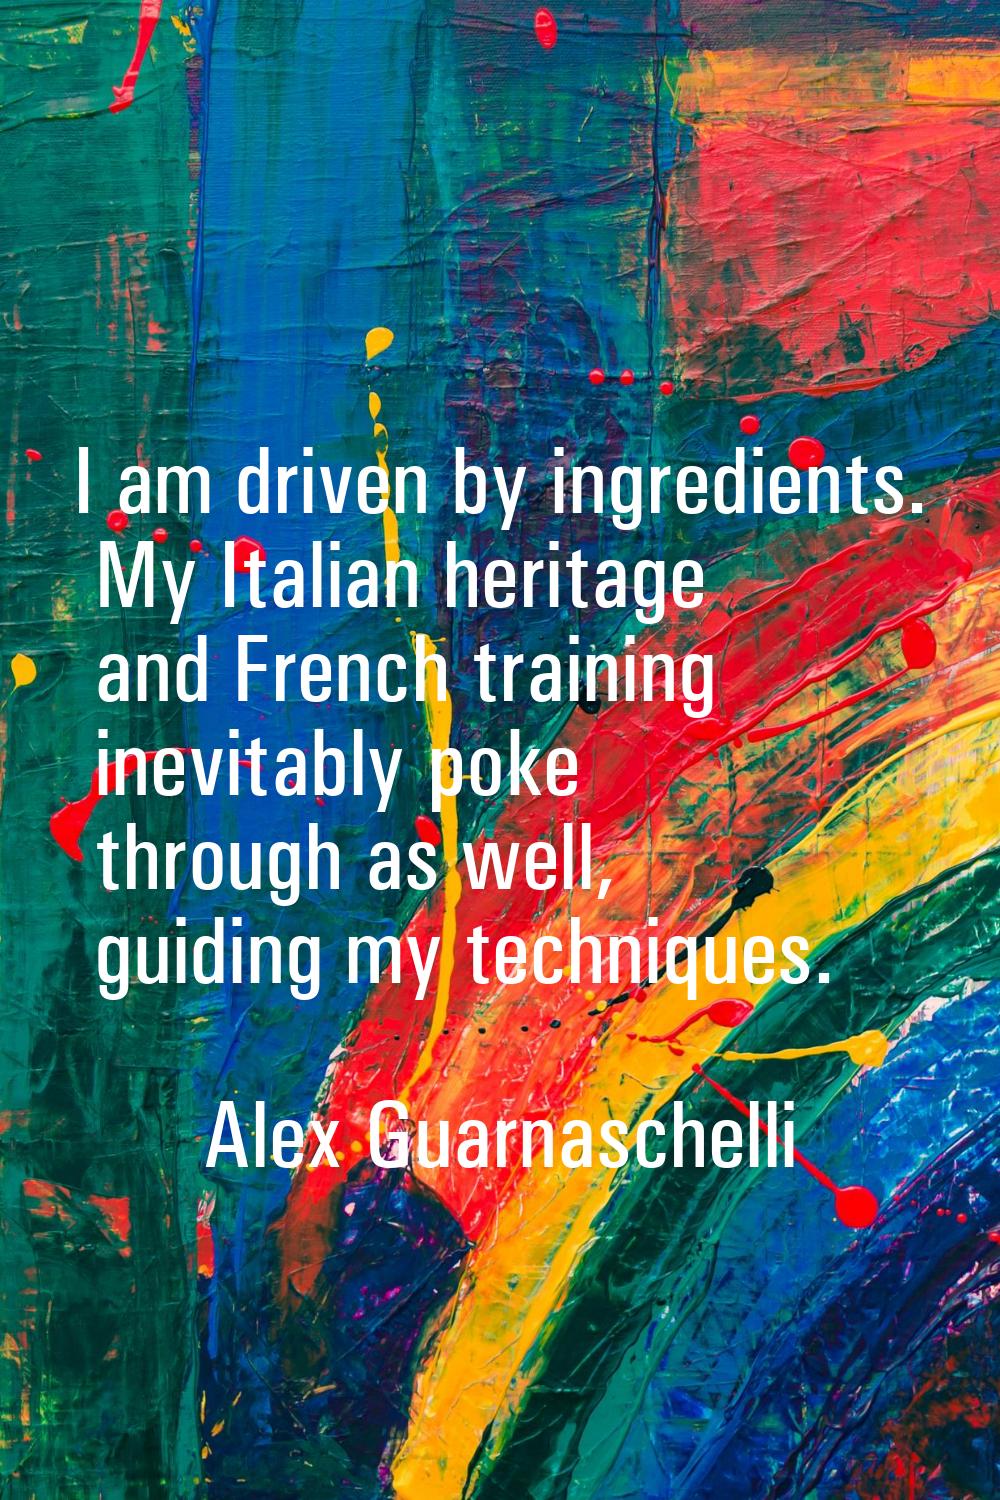 I am driven by ingredients. My Italian heritage and French training inevitably poke through as well